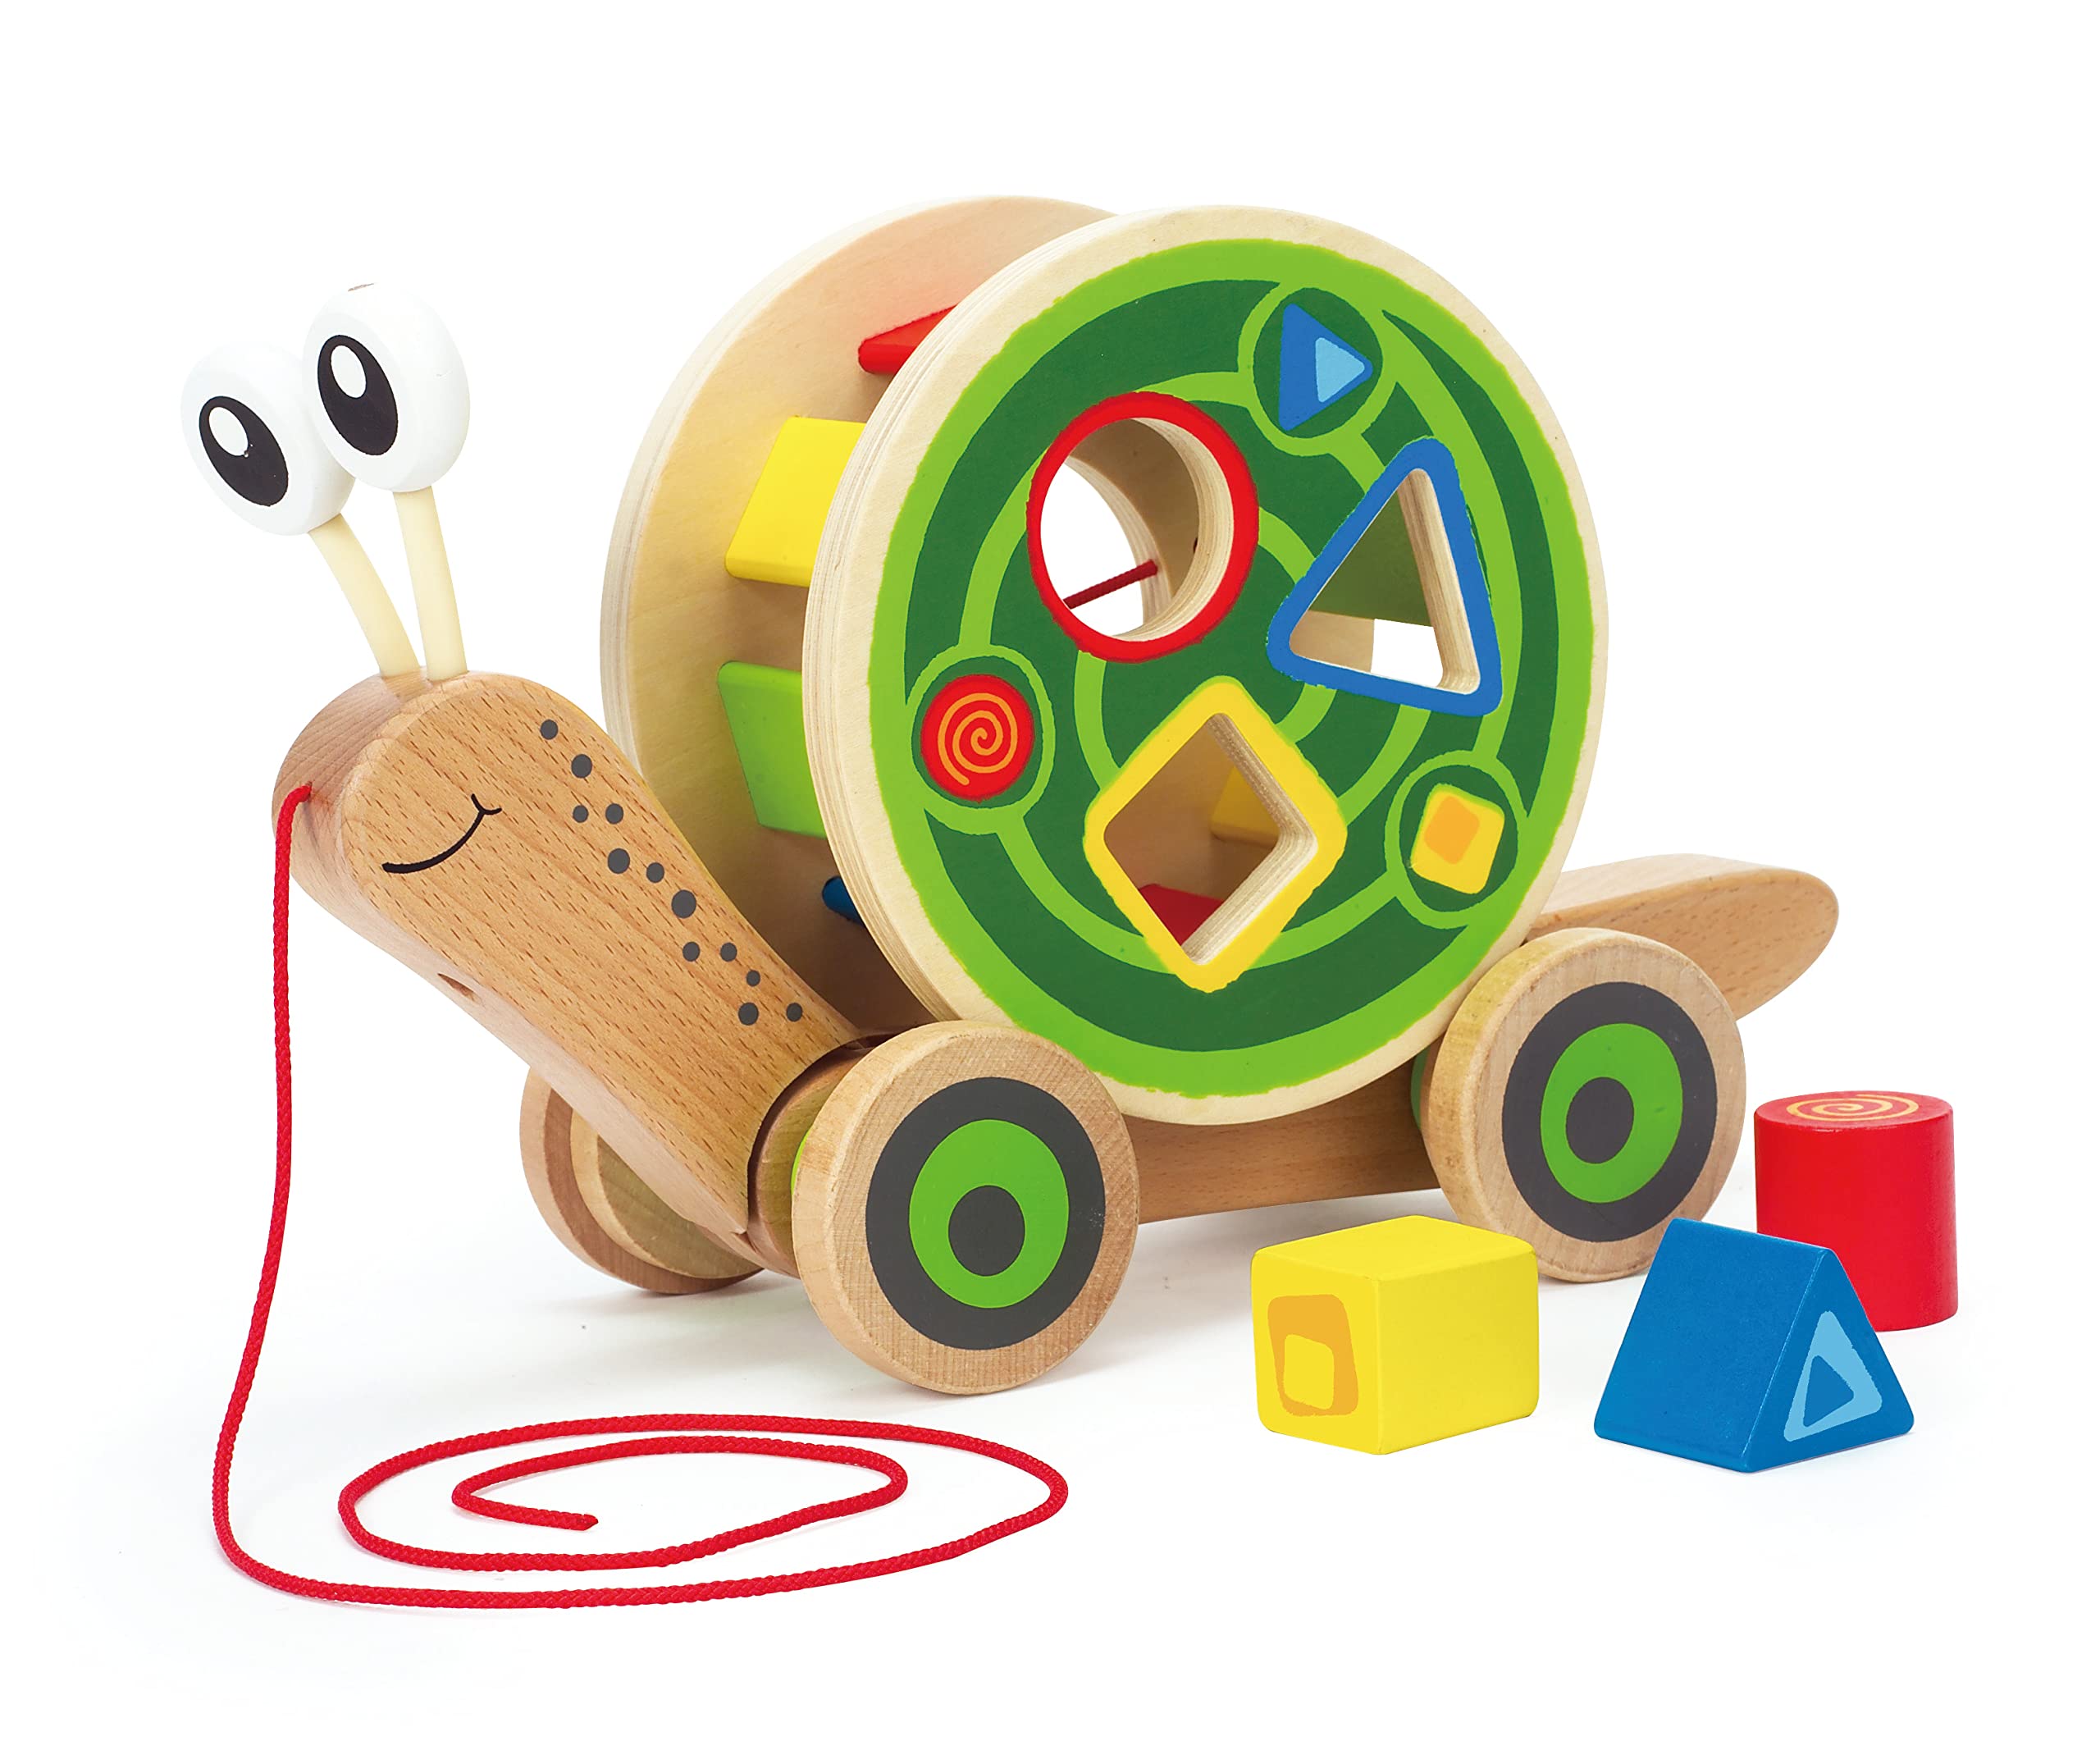 Book Cover Award Winning Hape Walk-A-Long Snail Toddler Wooden Pull Toy, L: 11.9, W: 4.4, H: 7.3 inch